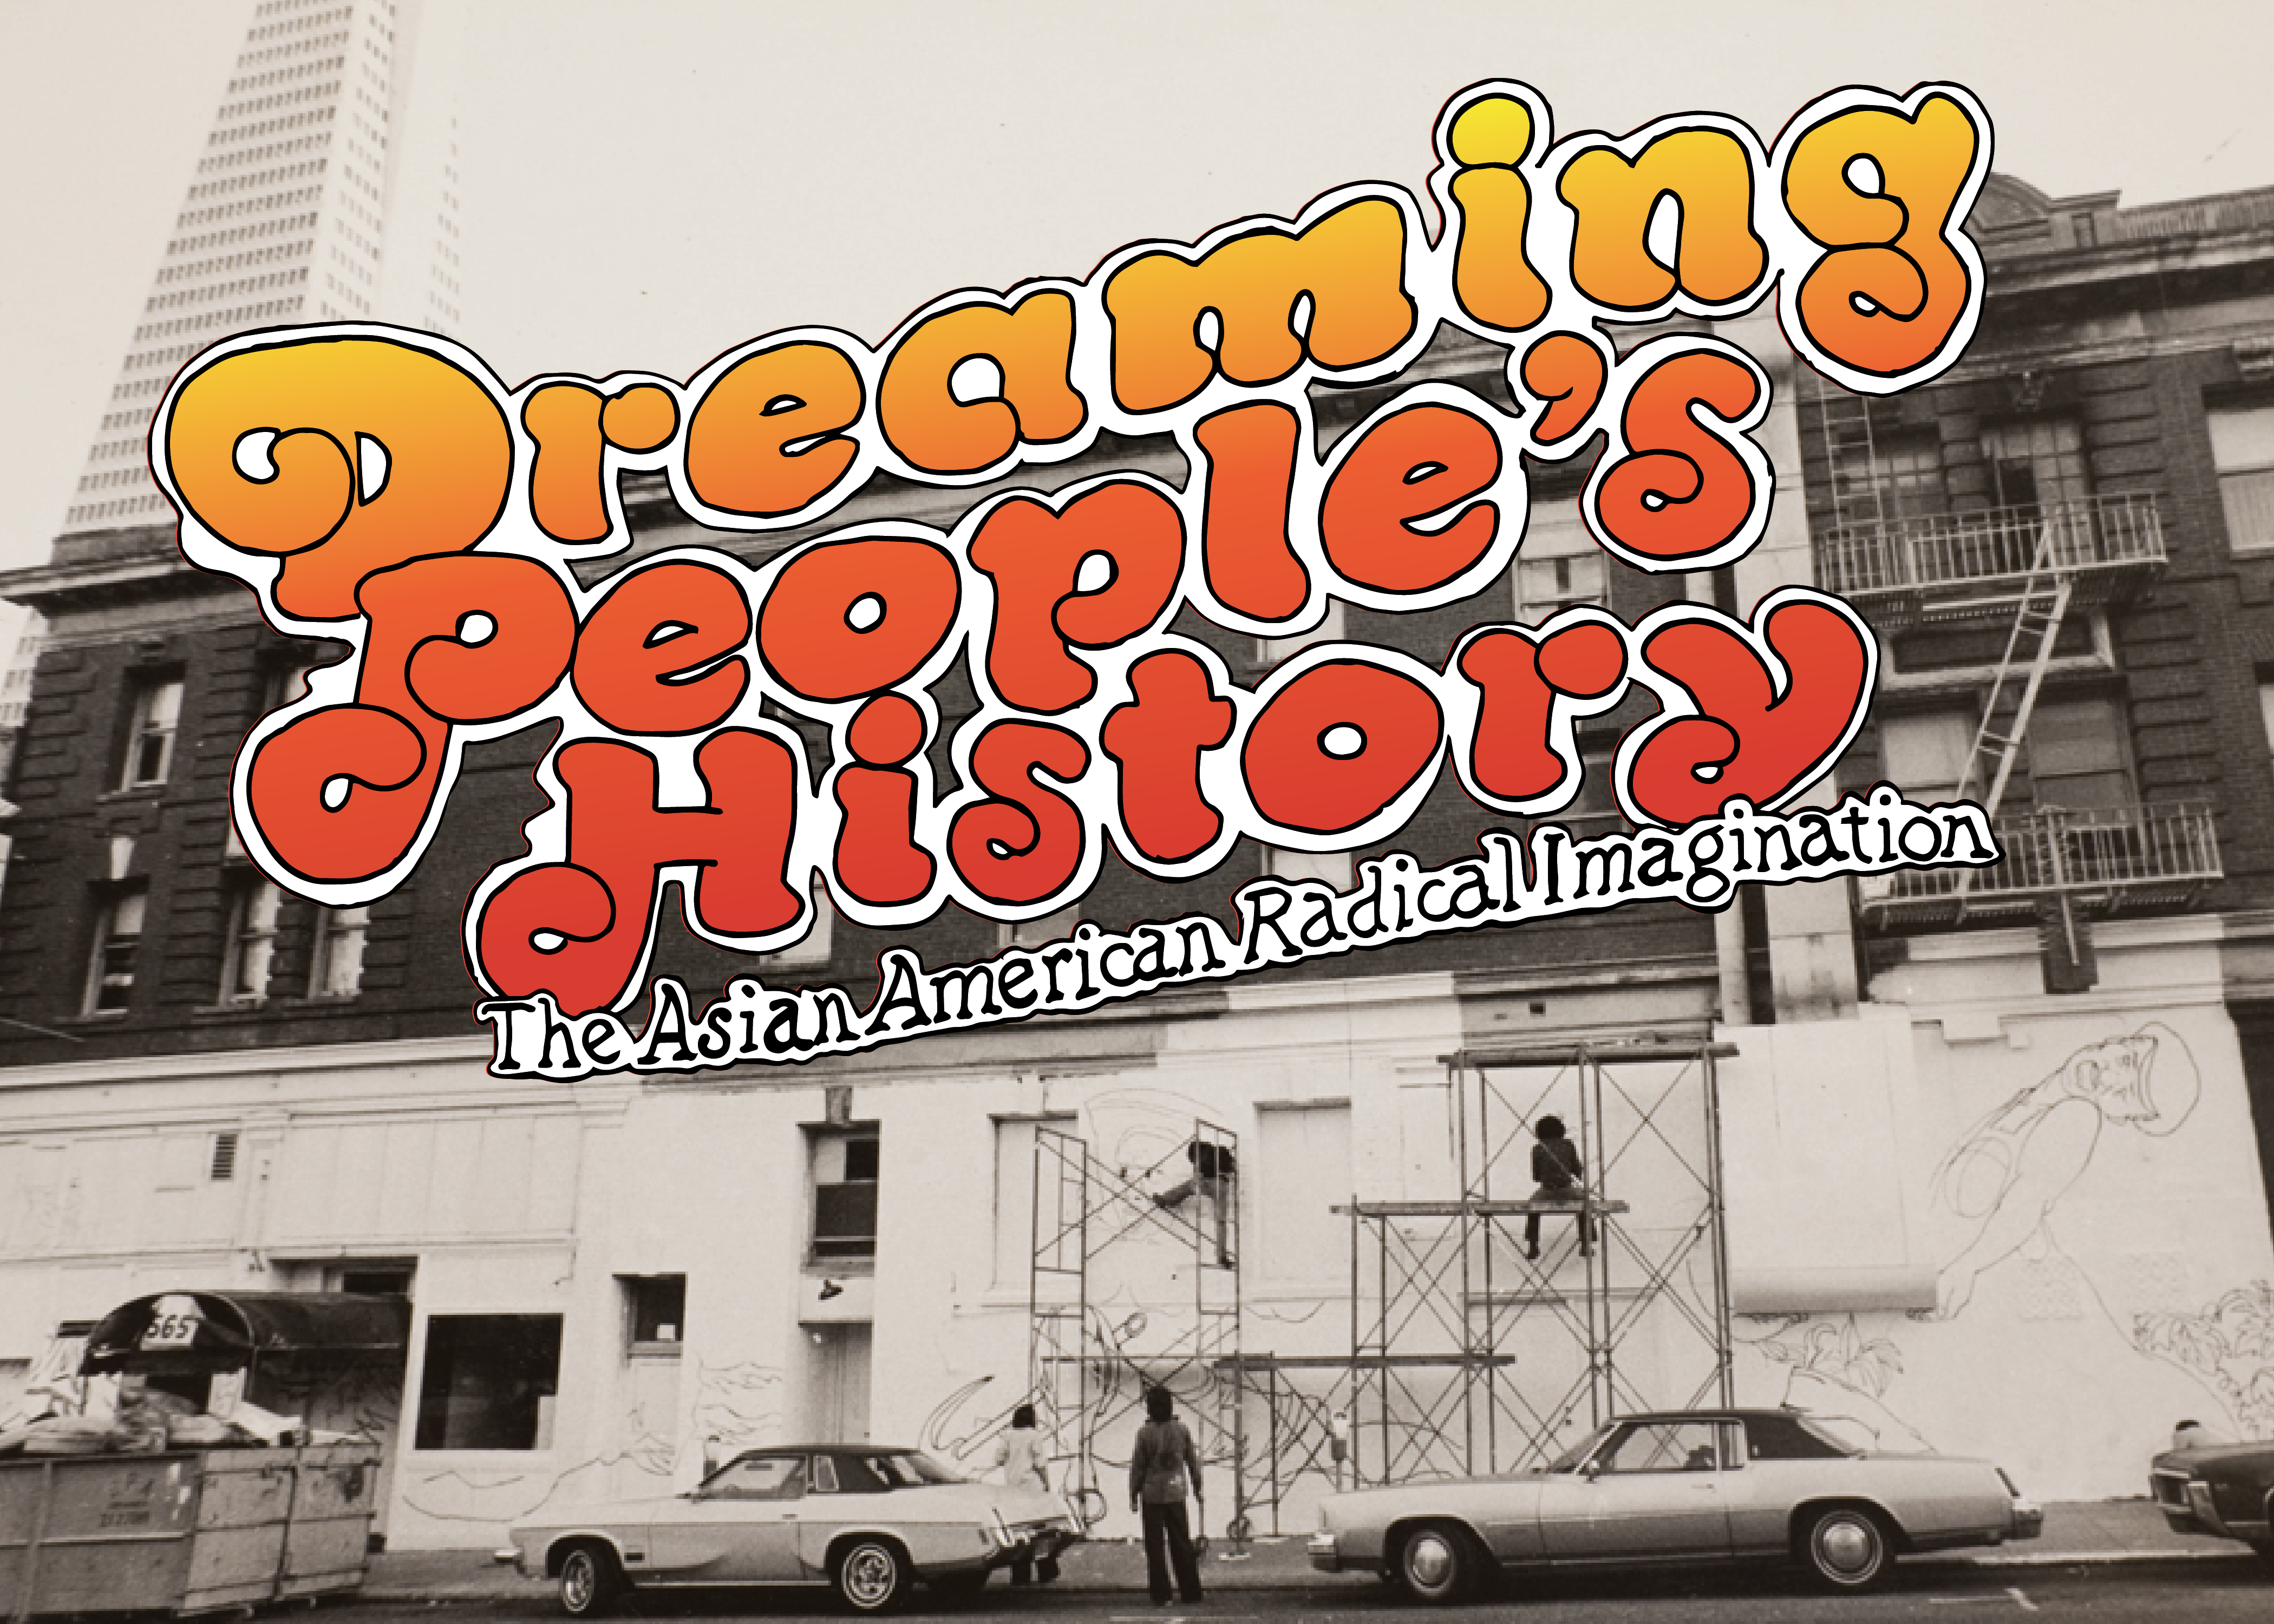 Dreaming People's History - archival image of people painting a mural